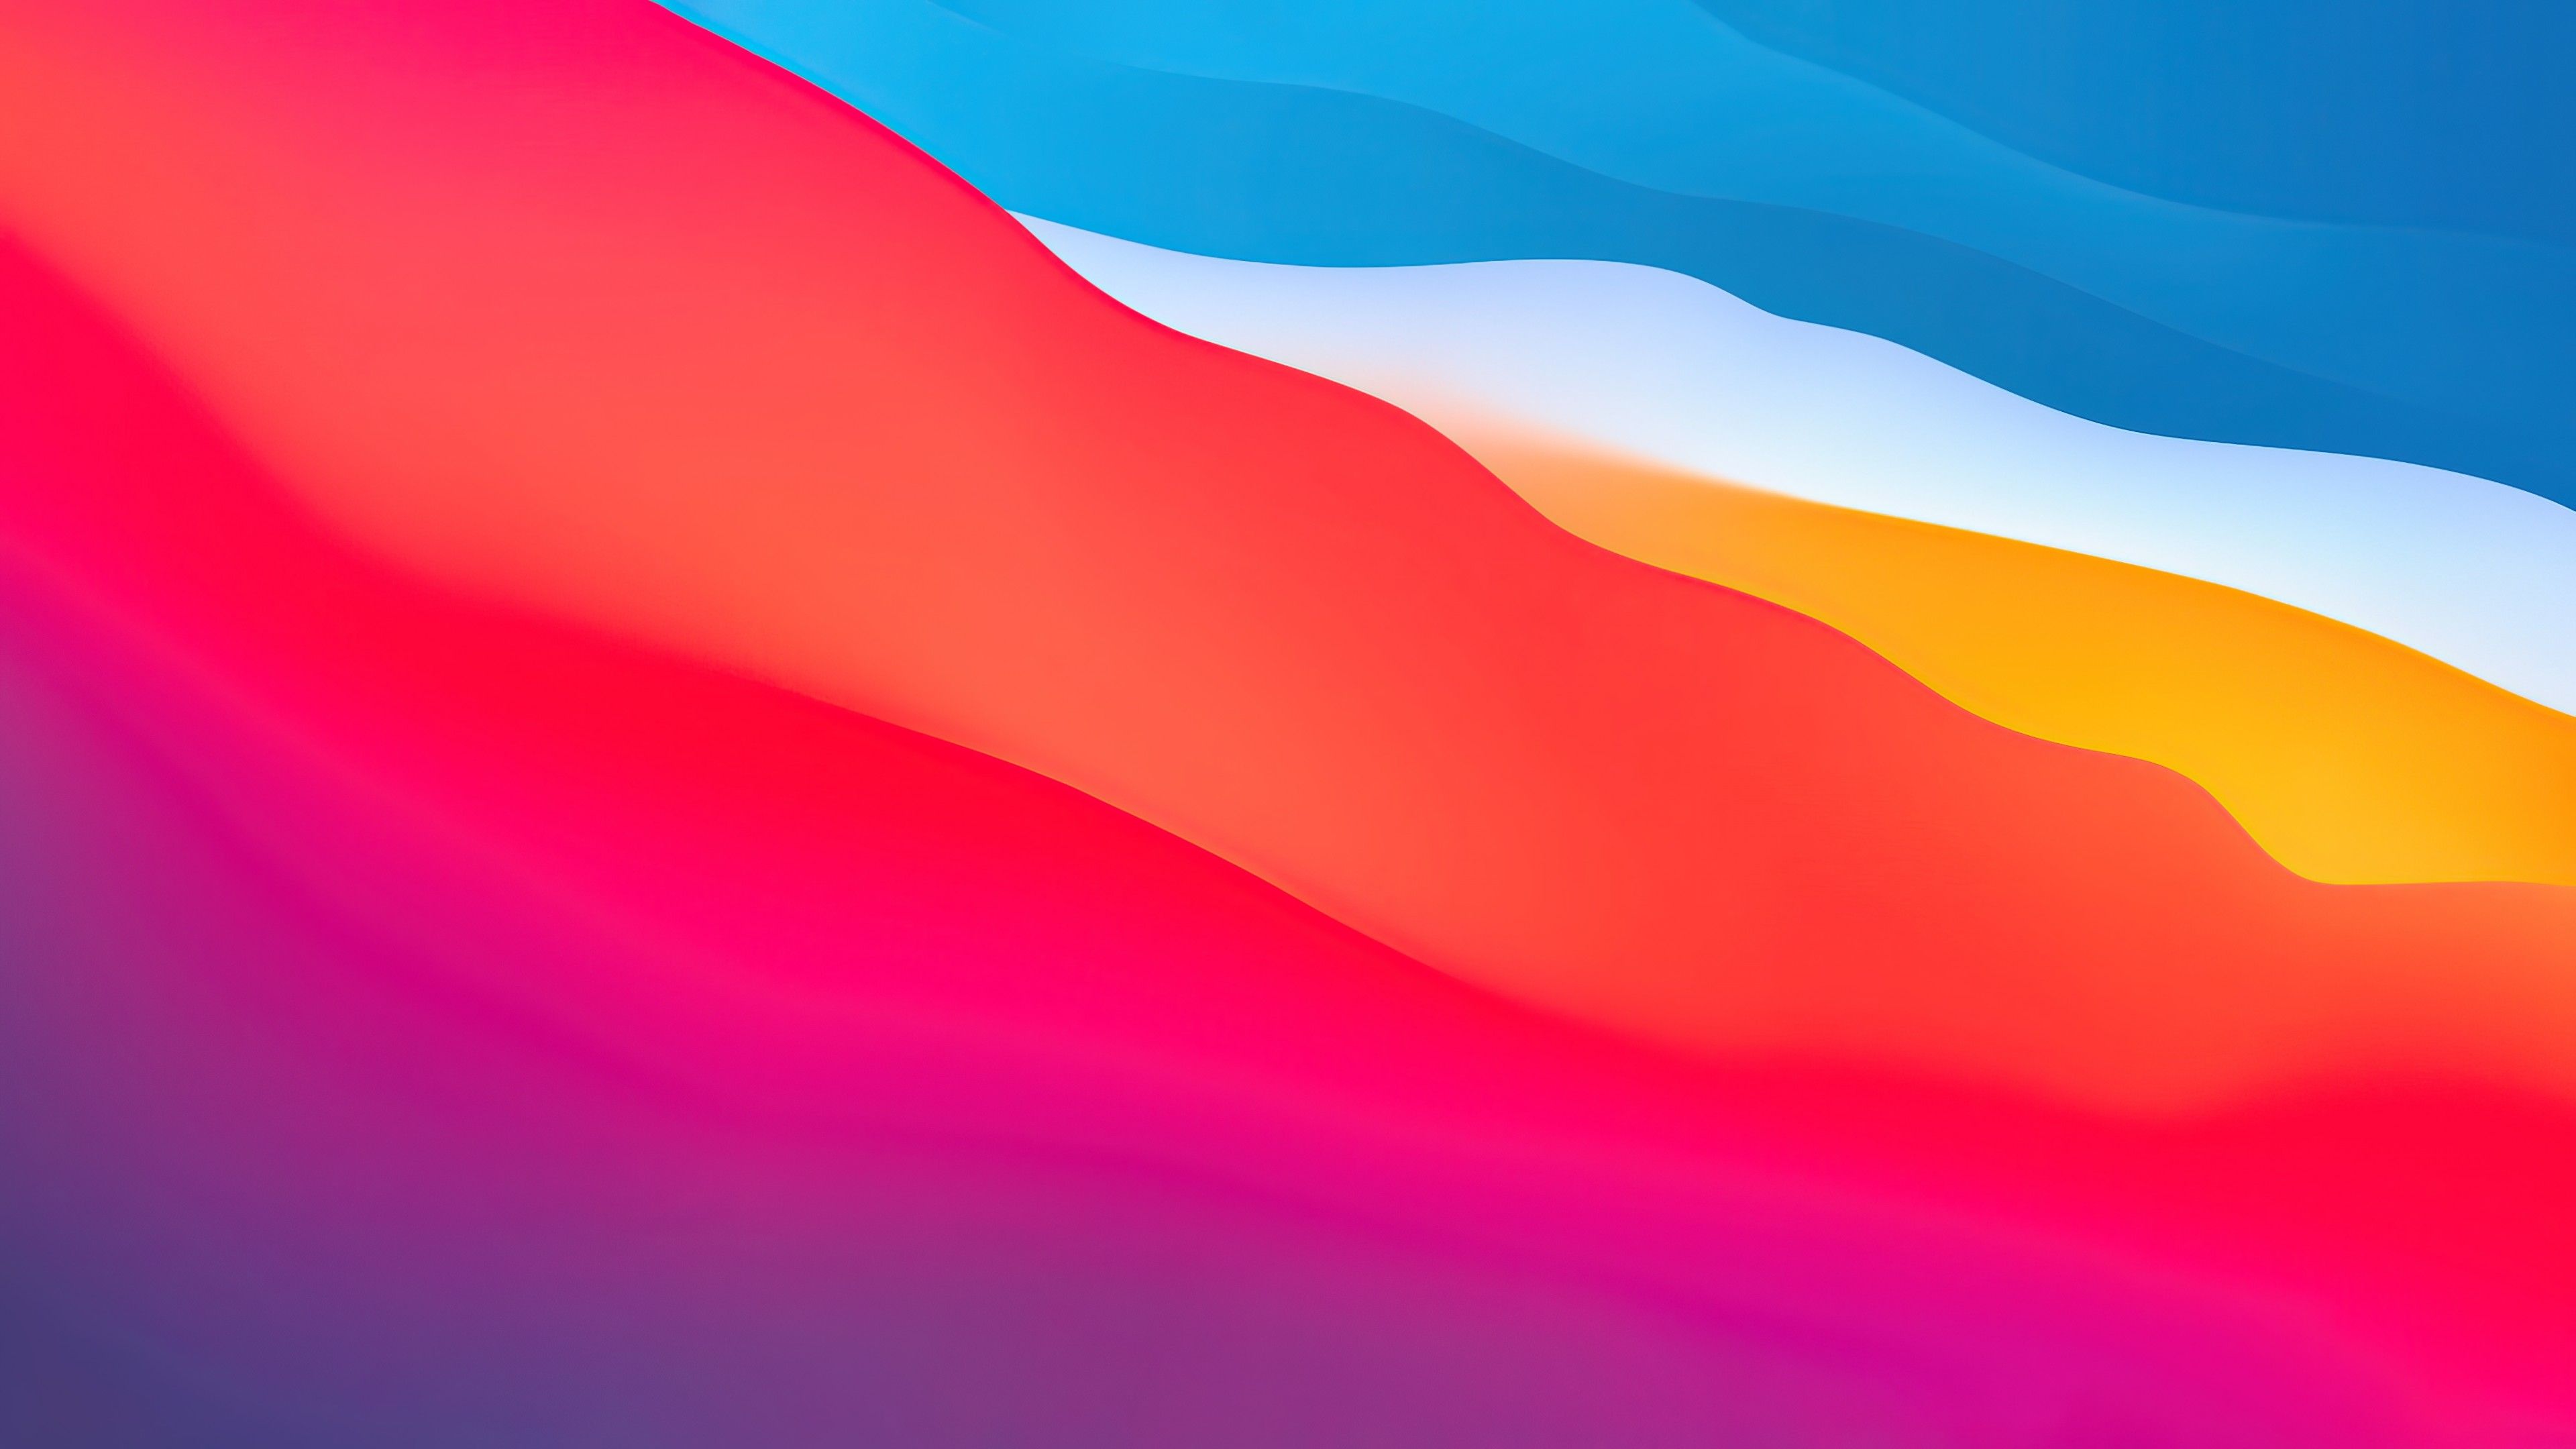 macOS Big Sur Wallpapers 4K, Apple, Layers, Fluidic, Colorful, WWDC, Stock, Gradients,